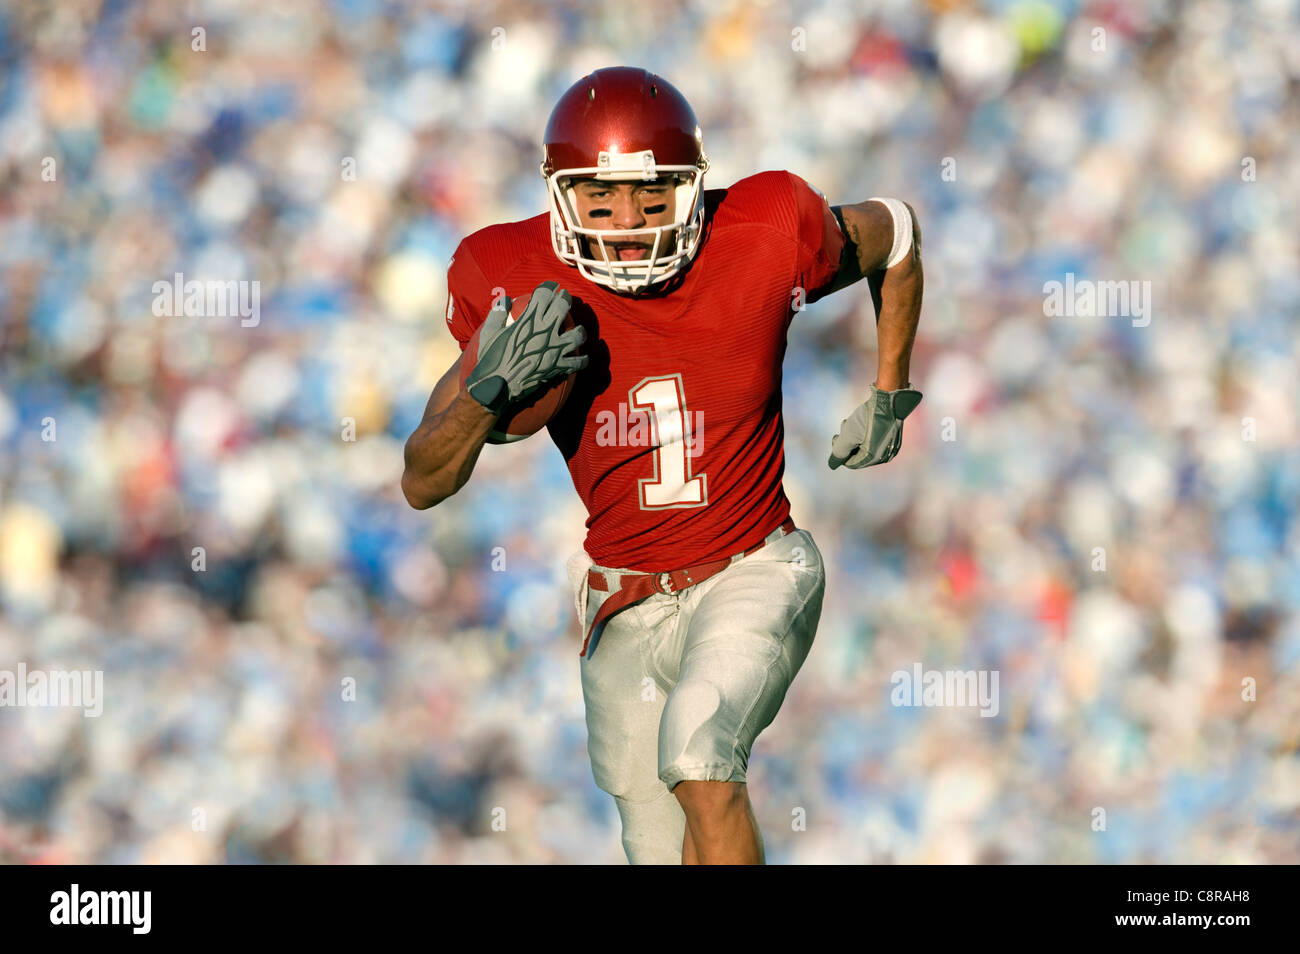 African American football player running on field in game Stock Photo